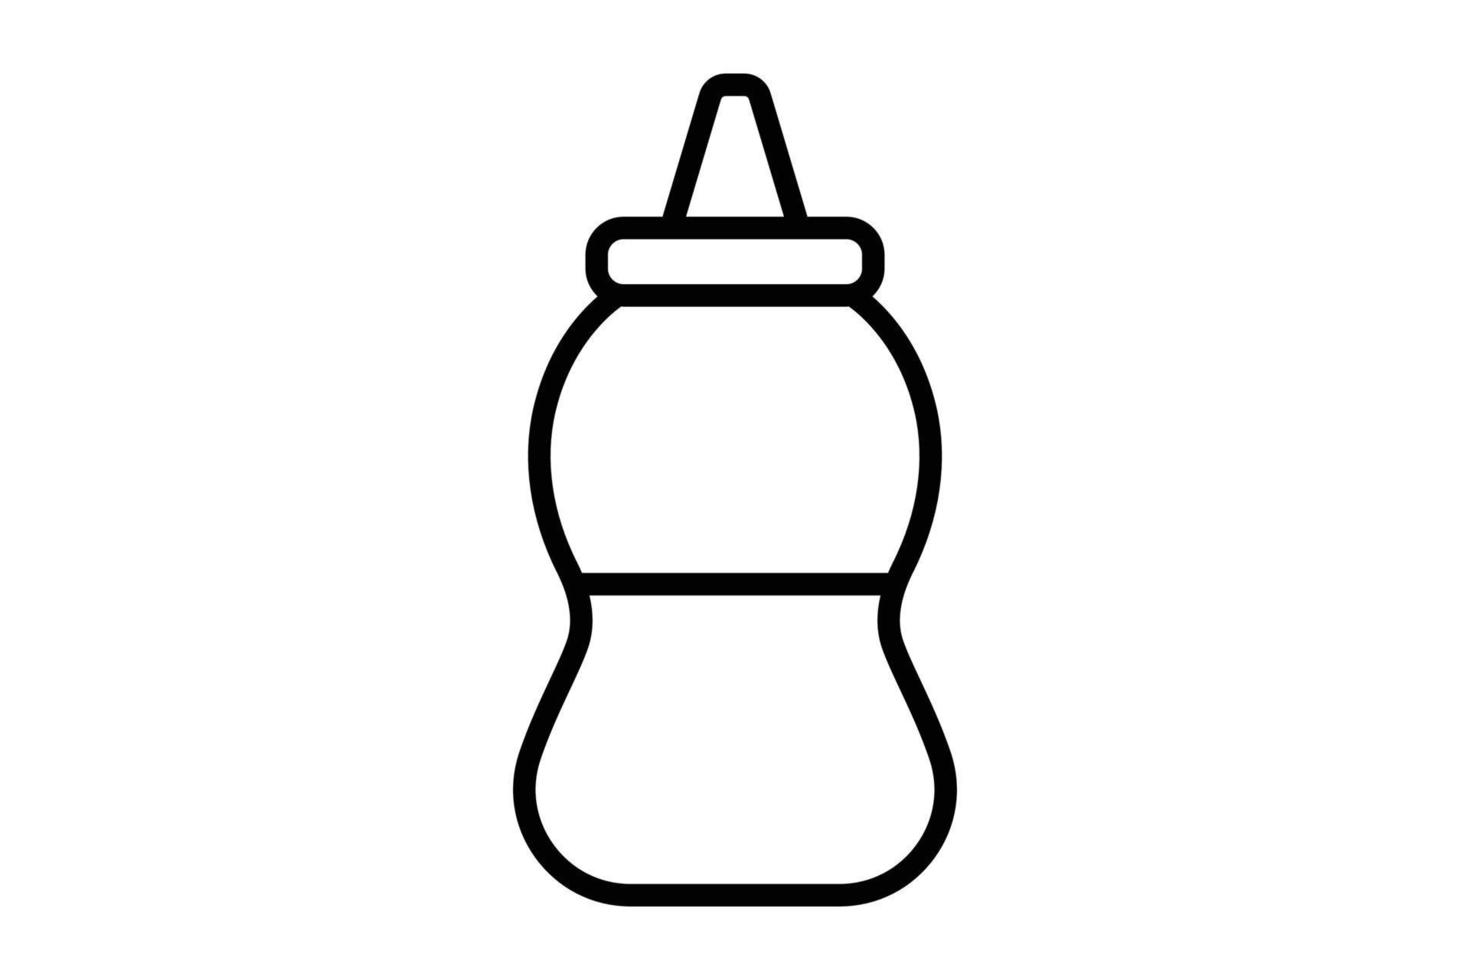 Mustard icon illustration. icon related to cooking spices. outline icon style. Simple vector design editable